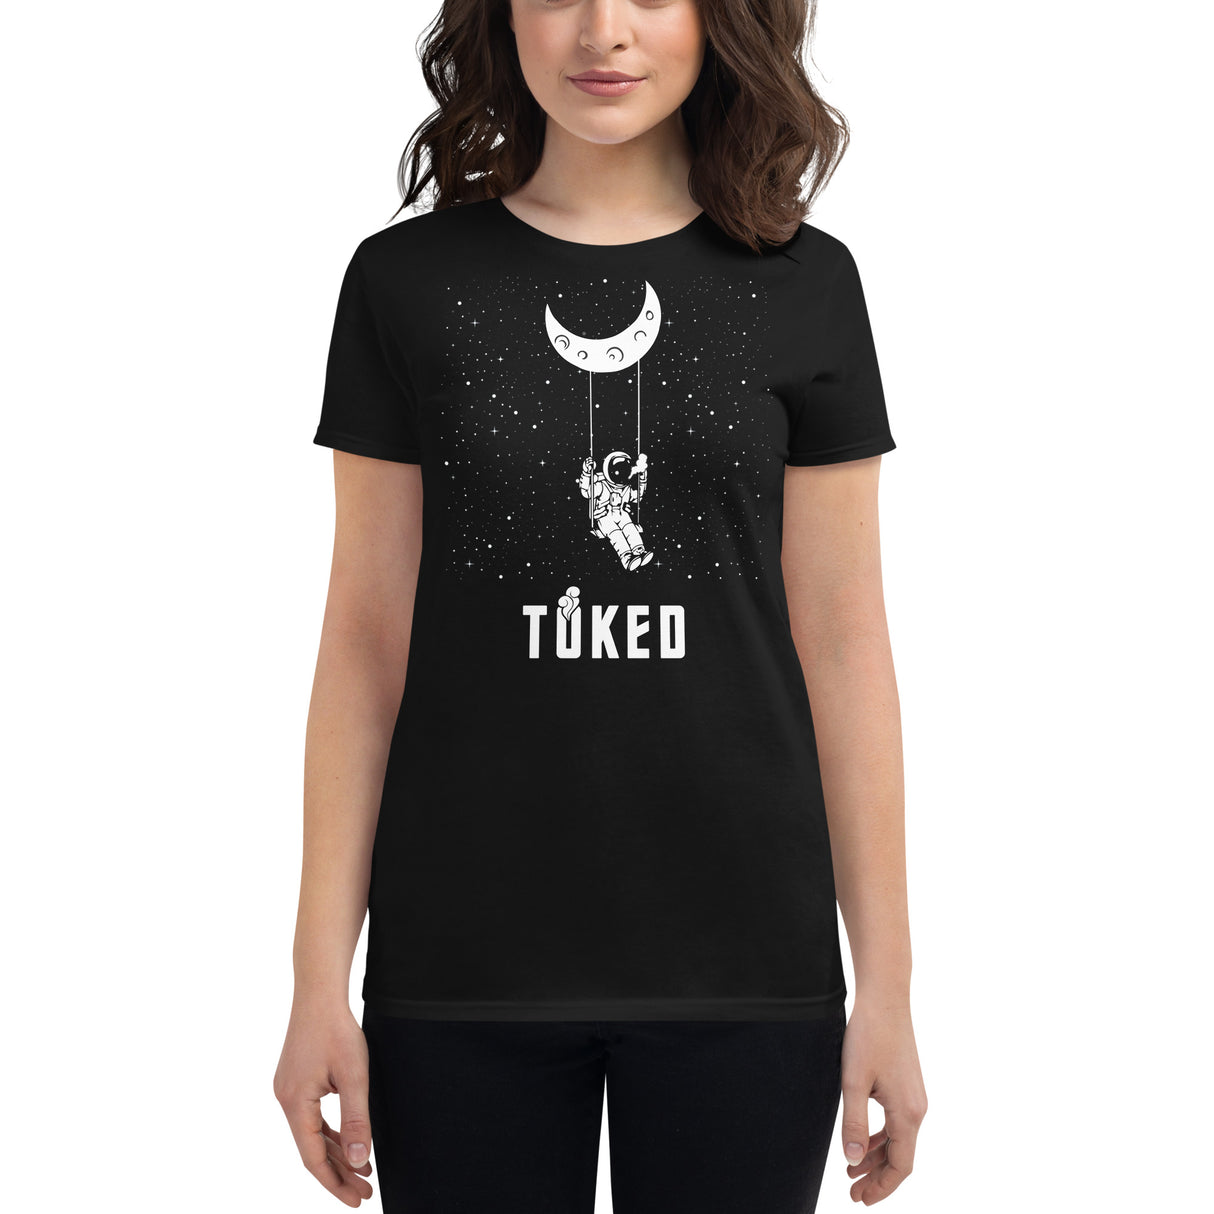 Astrowoman TOKED T-Shirt